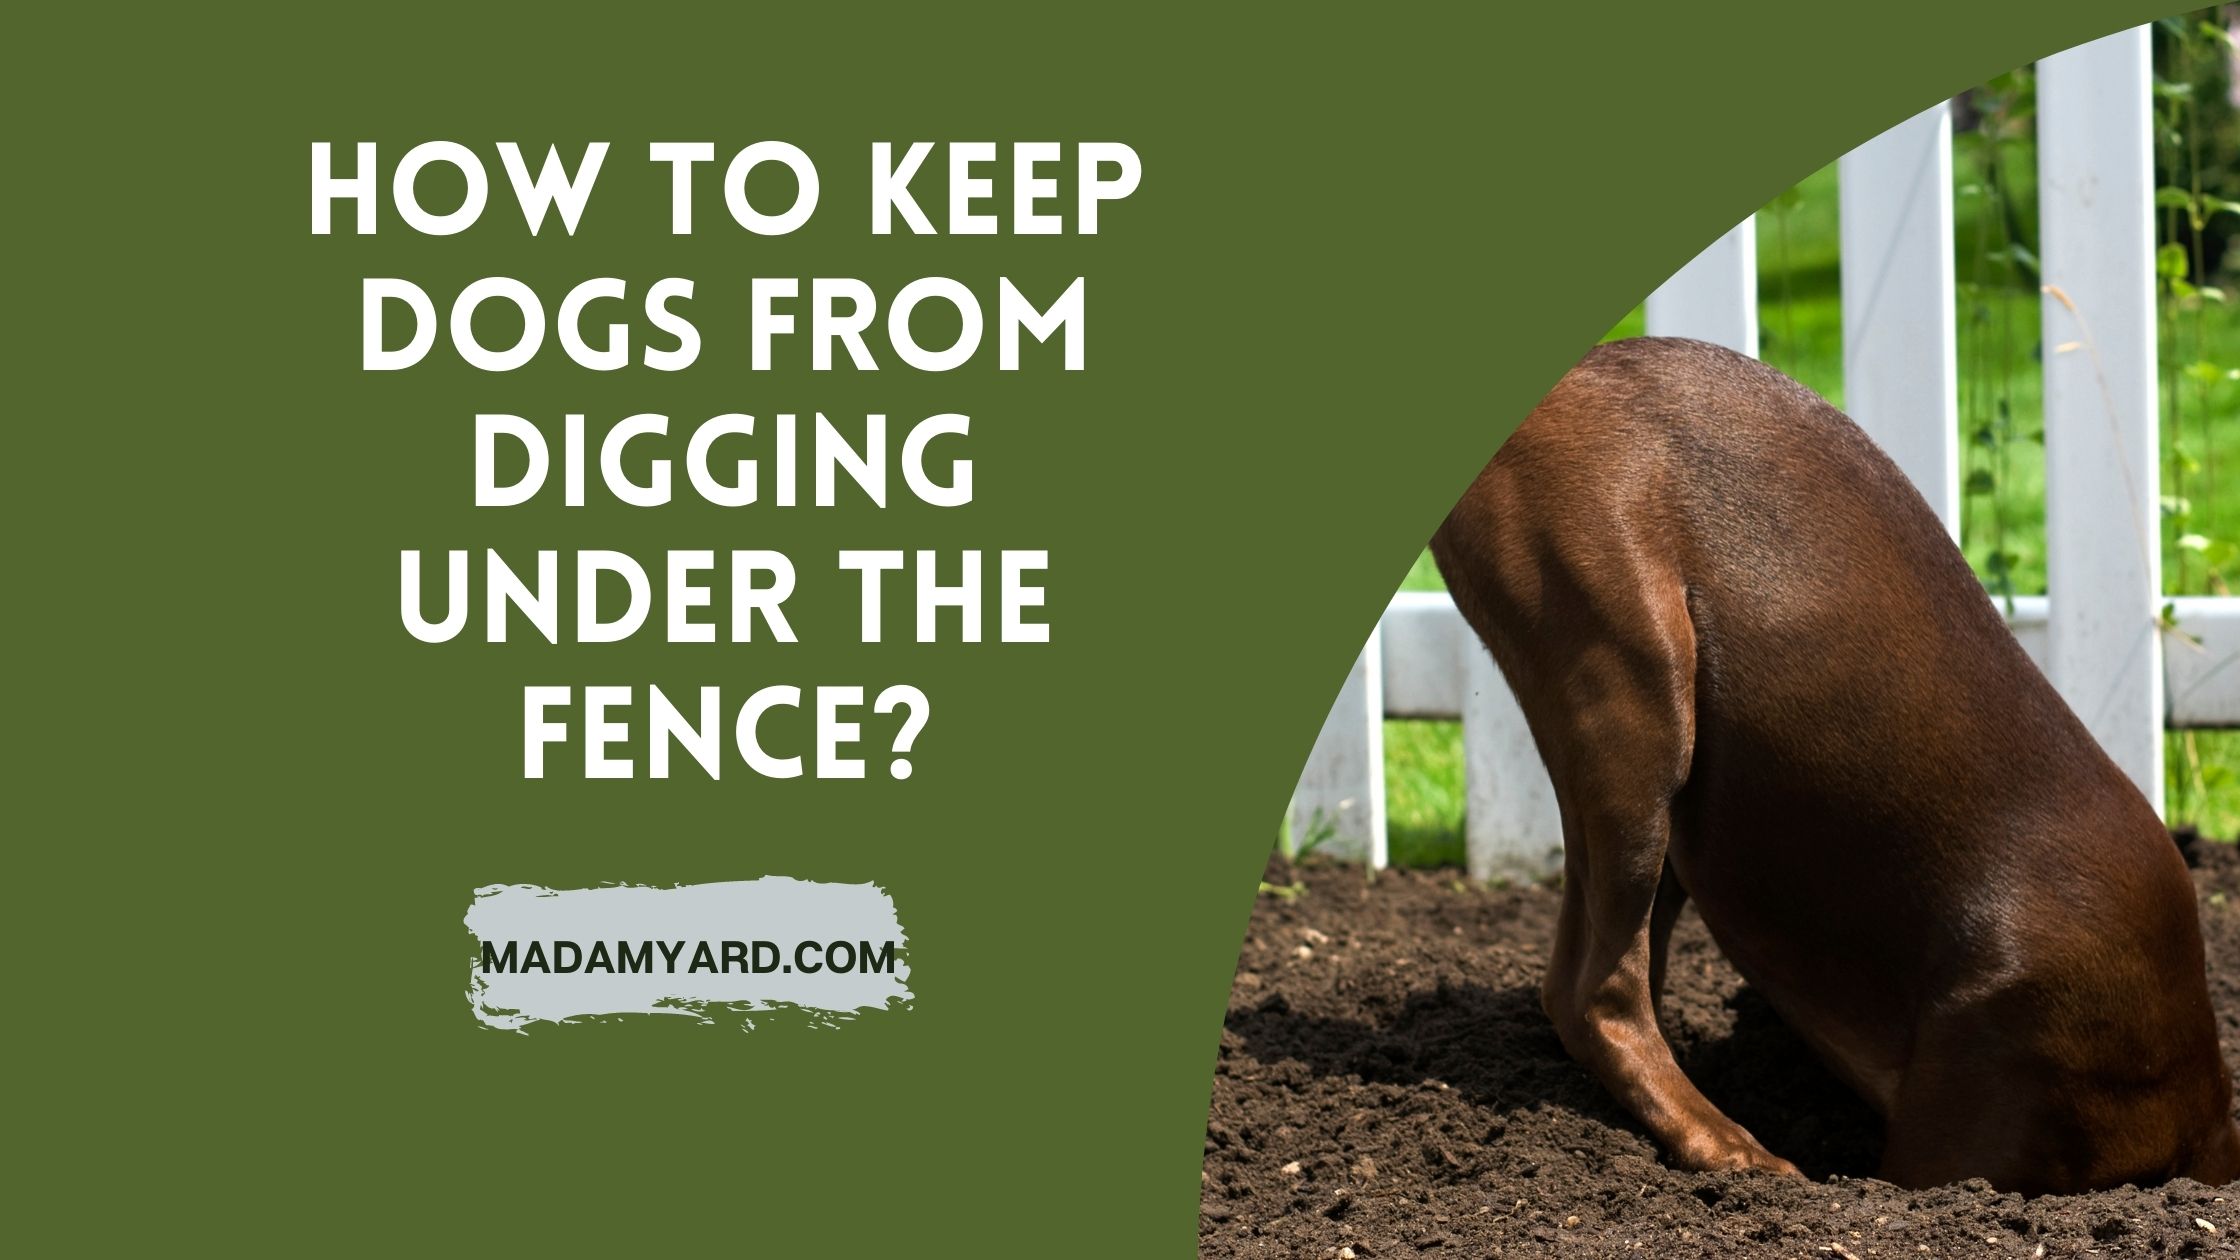 http://madamyard.com/wp-content/uploads/2021/12/How-To-Keep-Dogs-From-Digging-Under-The-Fence.jpg